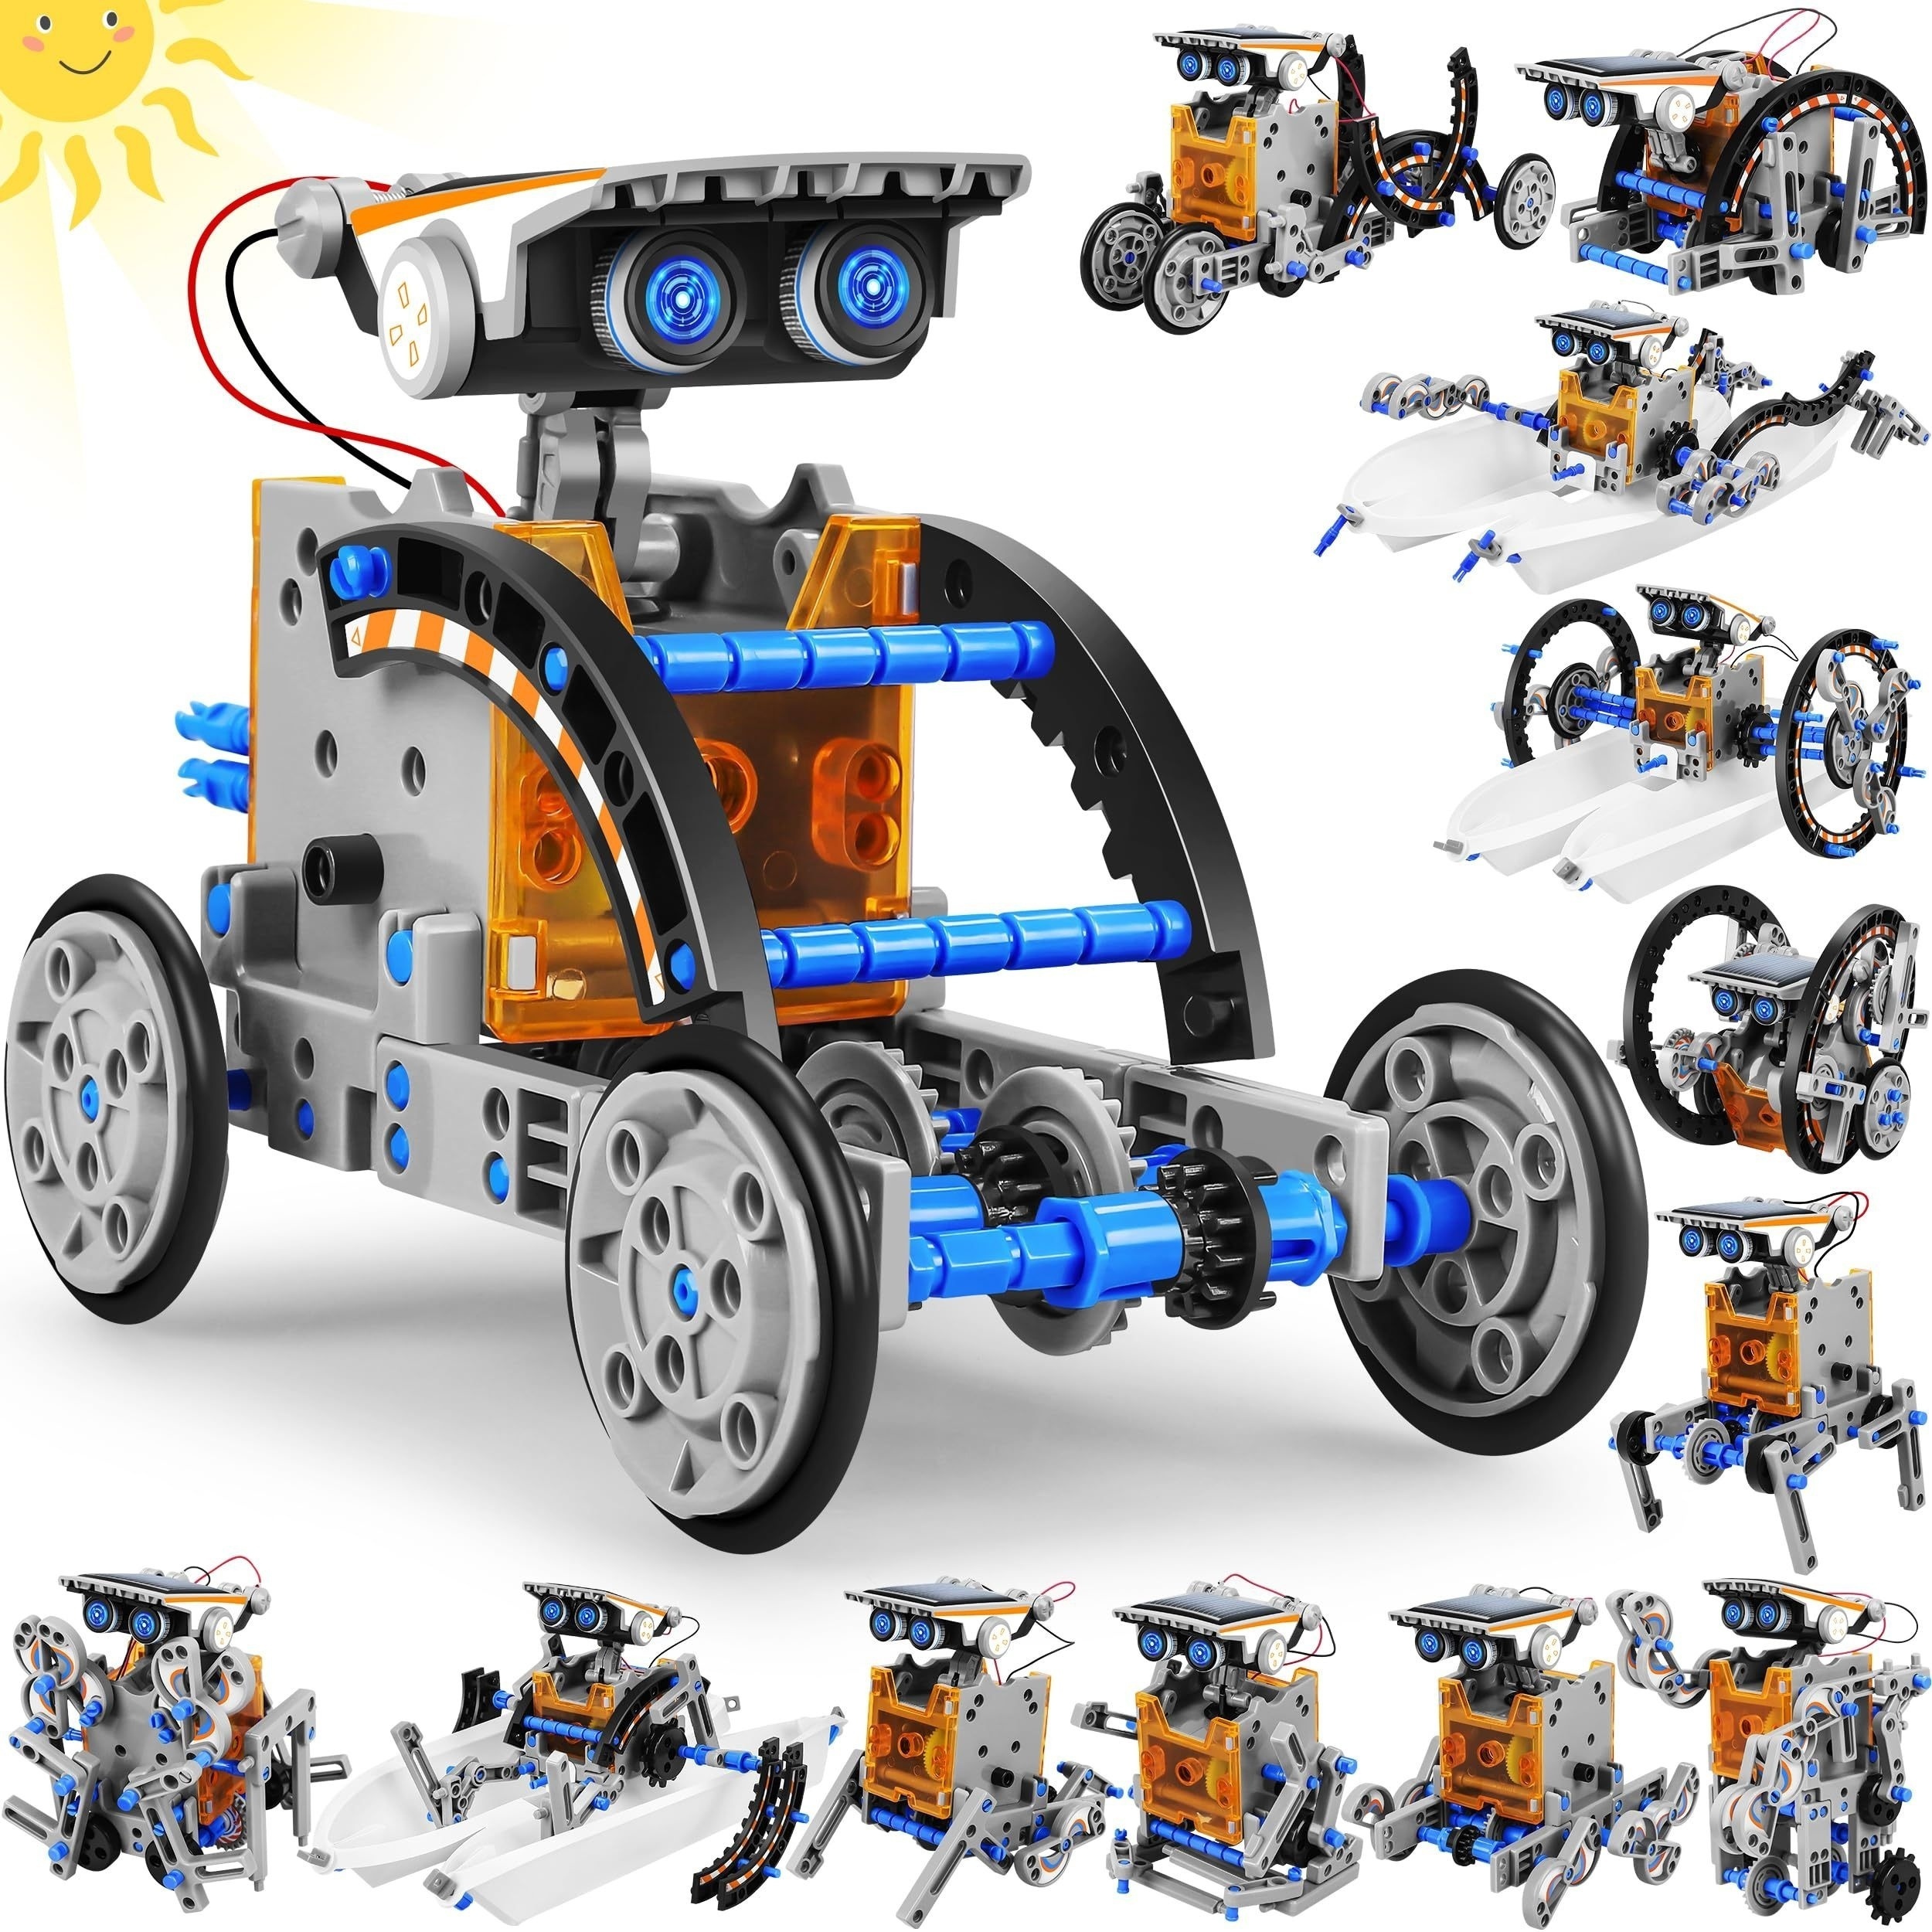 

A Solar-powered Robot Toy For Children Aged 8-12, Diy Building Science Experiment Robot Kit, A Birthday Gift For Boys, Girls, Children, And Teenagers Aged 8, 9, 10, 11, And 12, Powered By The Sun.